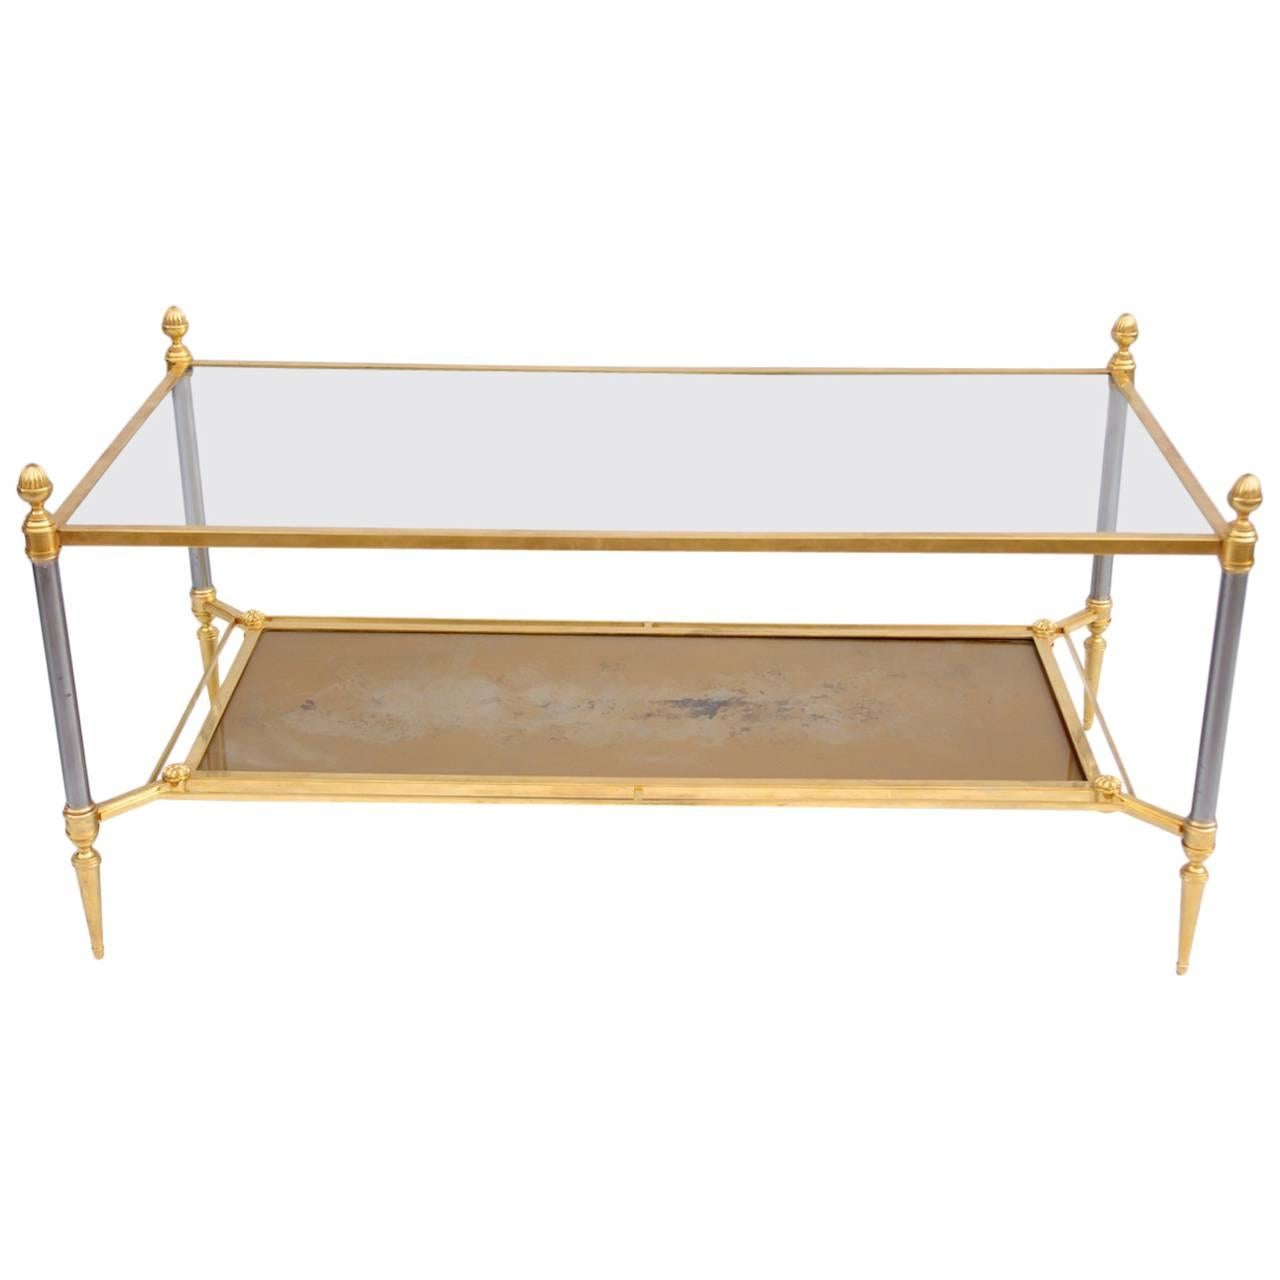 Maison Jansen Gilt Brass and Glass Coffee Table from 1960